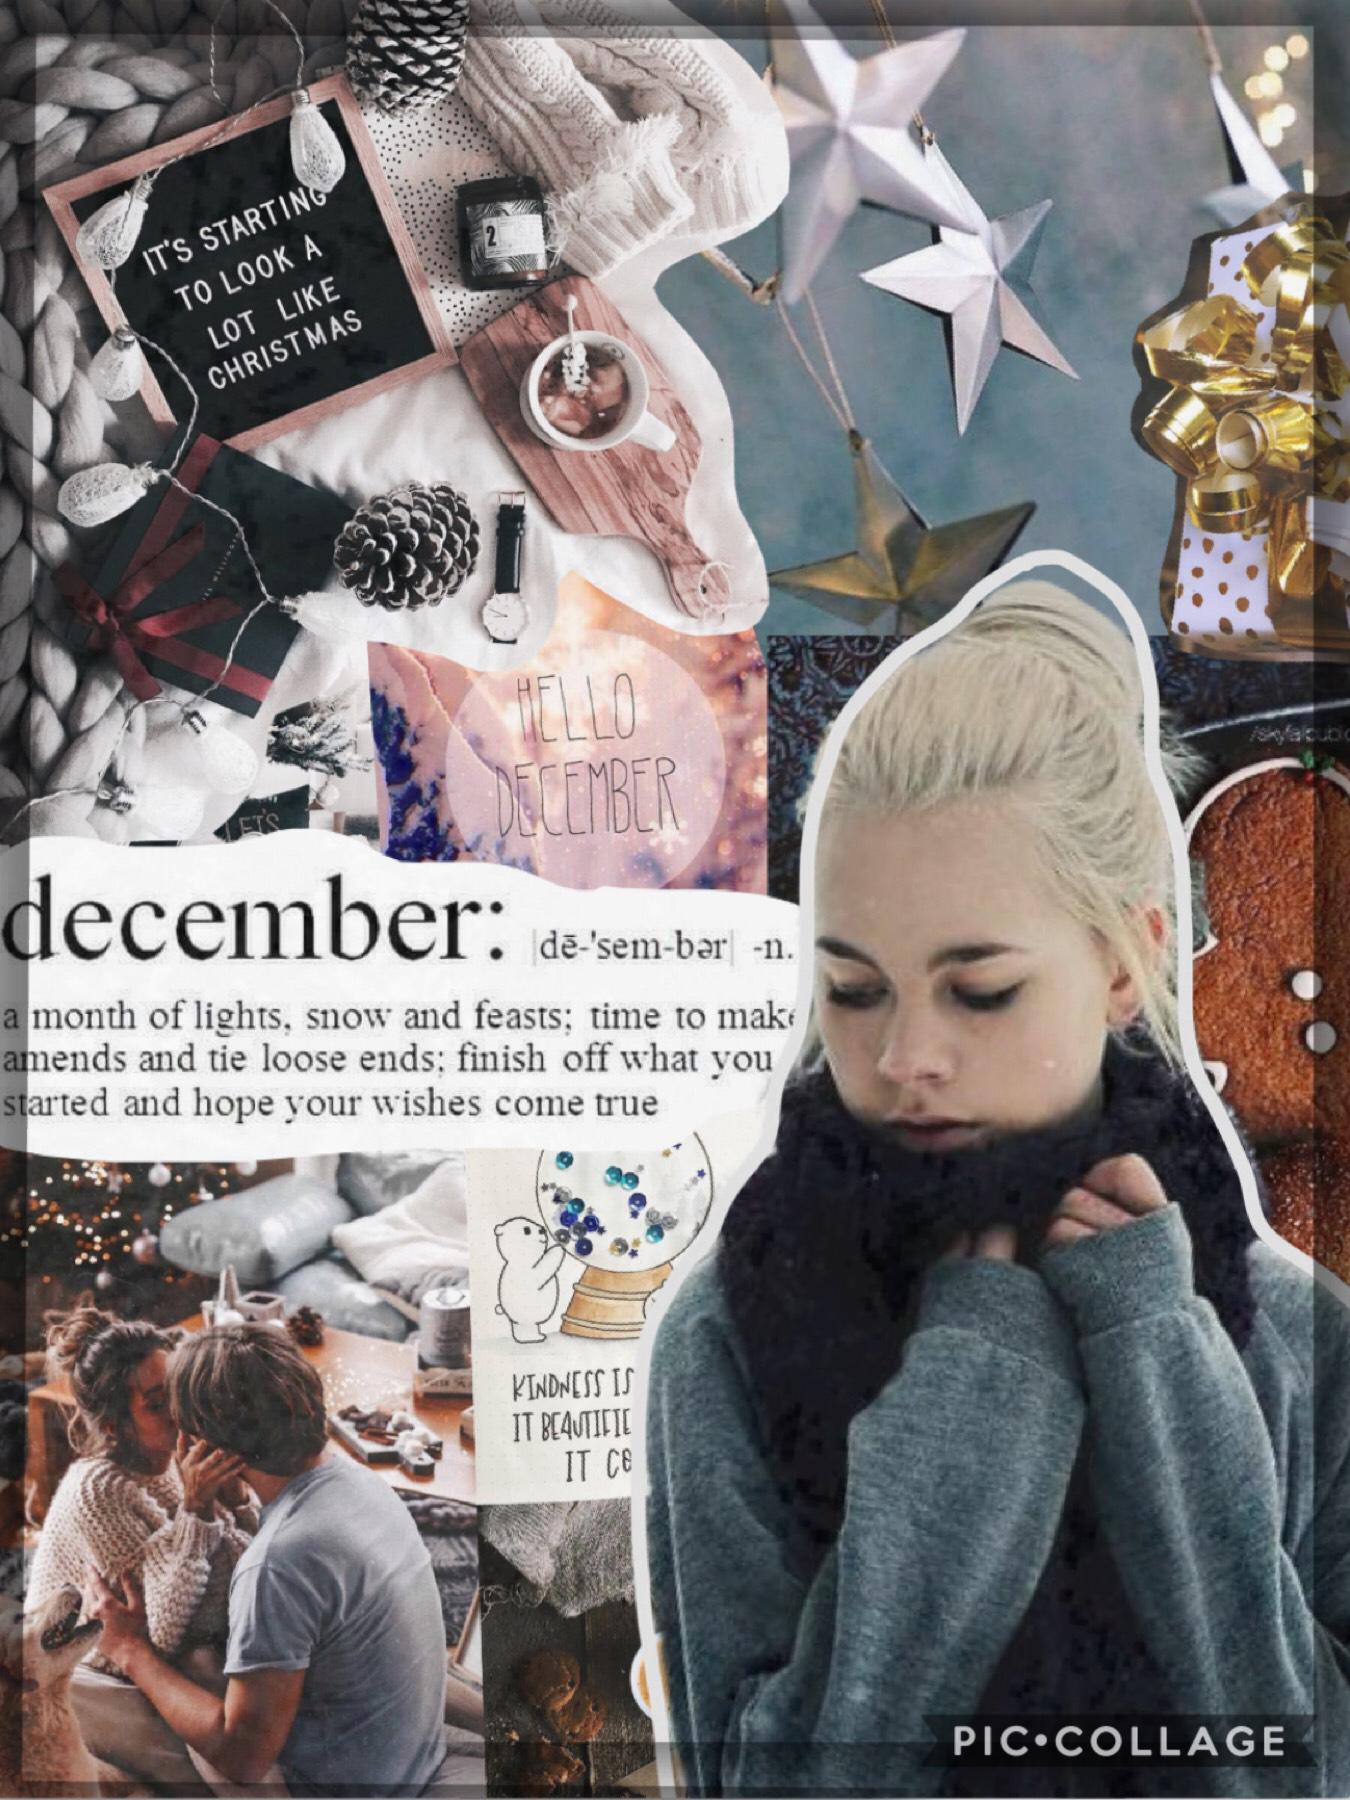 ❄️12/4/2018❄️ Tap the snowflake!
Hey lovelies!
I can’t believe it’s already December!!🎄 
Rate this /10?
Q// Whats your favorite thing about December?
A// it’s pretty obvious, CHRISTMAS! I also go caroling with a group of friends so that’s fun too..🙃